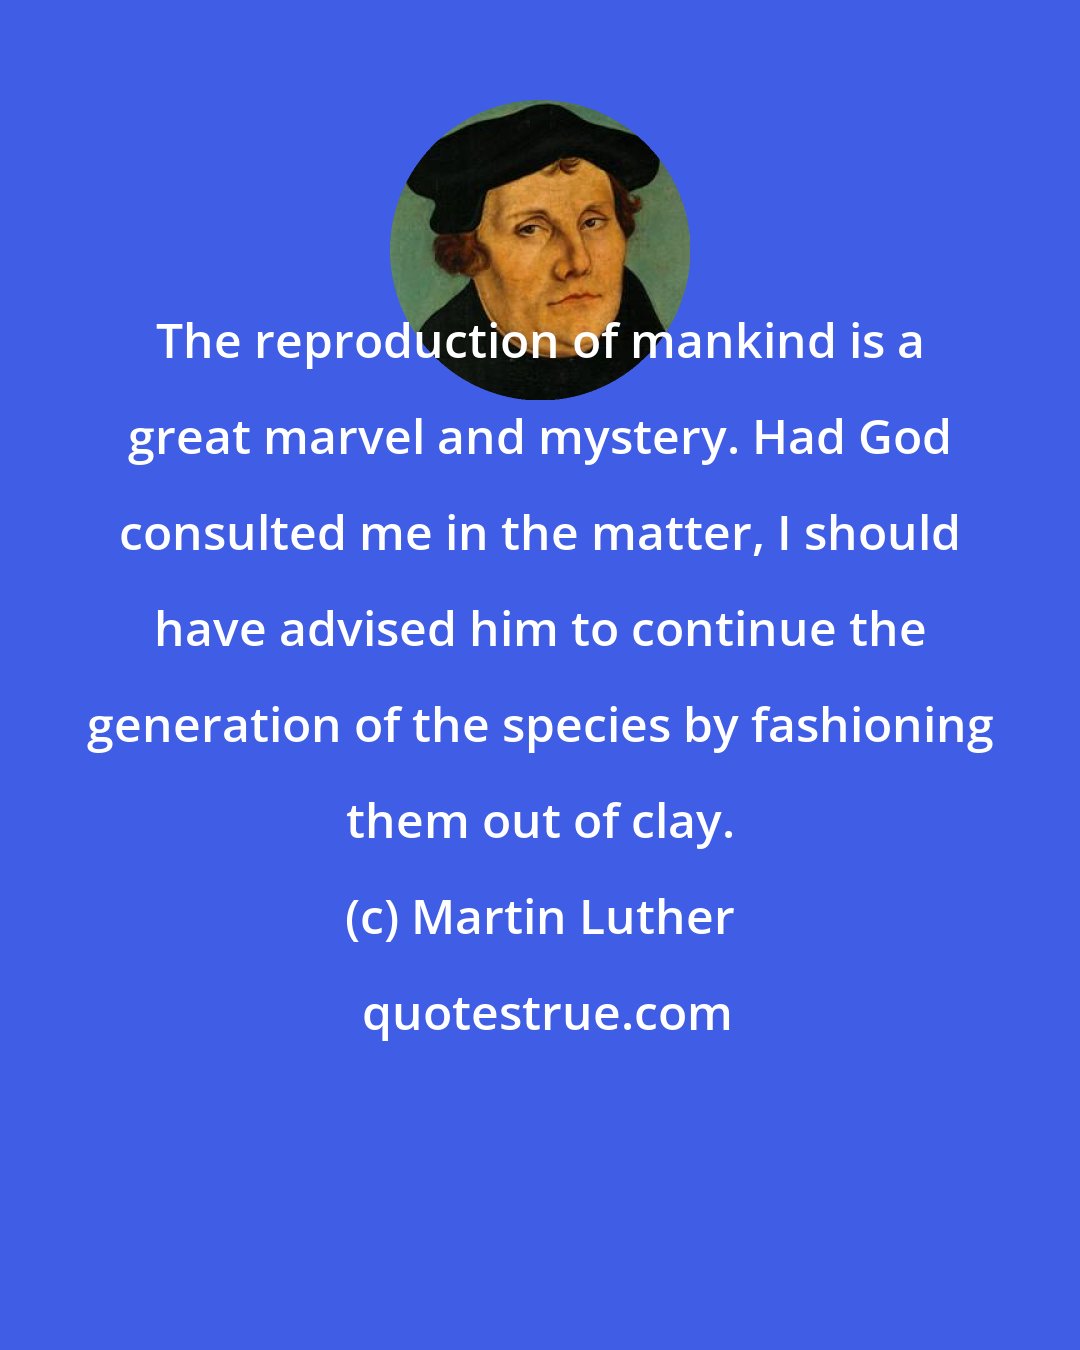 Martin Luther: The reproduction of mankind is a great marvel and mystery. Had God consulted me in the matter, I should have advised him to continue the generation of the species by fashioning them out of clay.